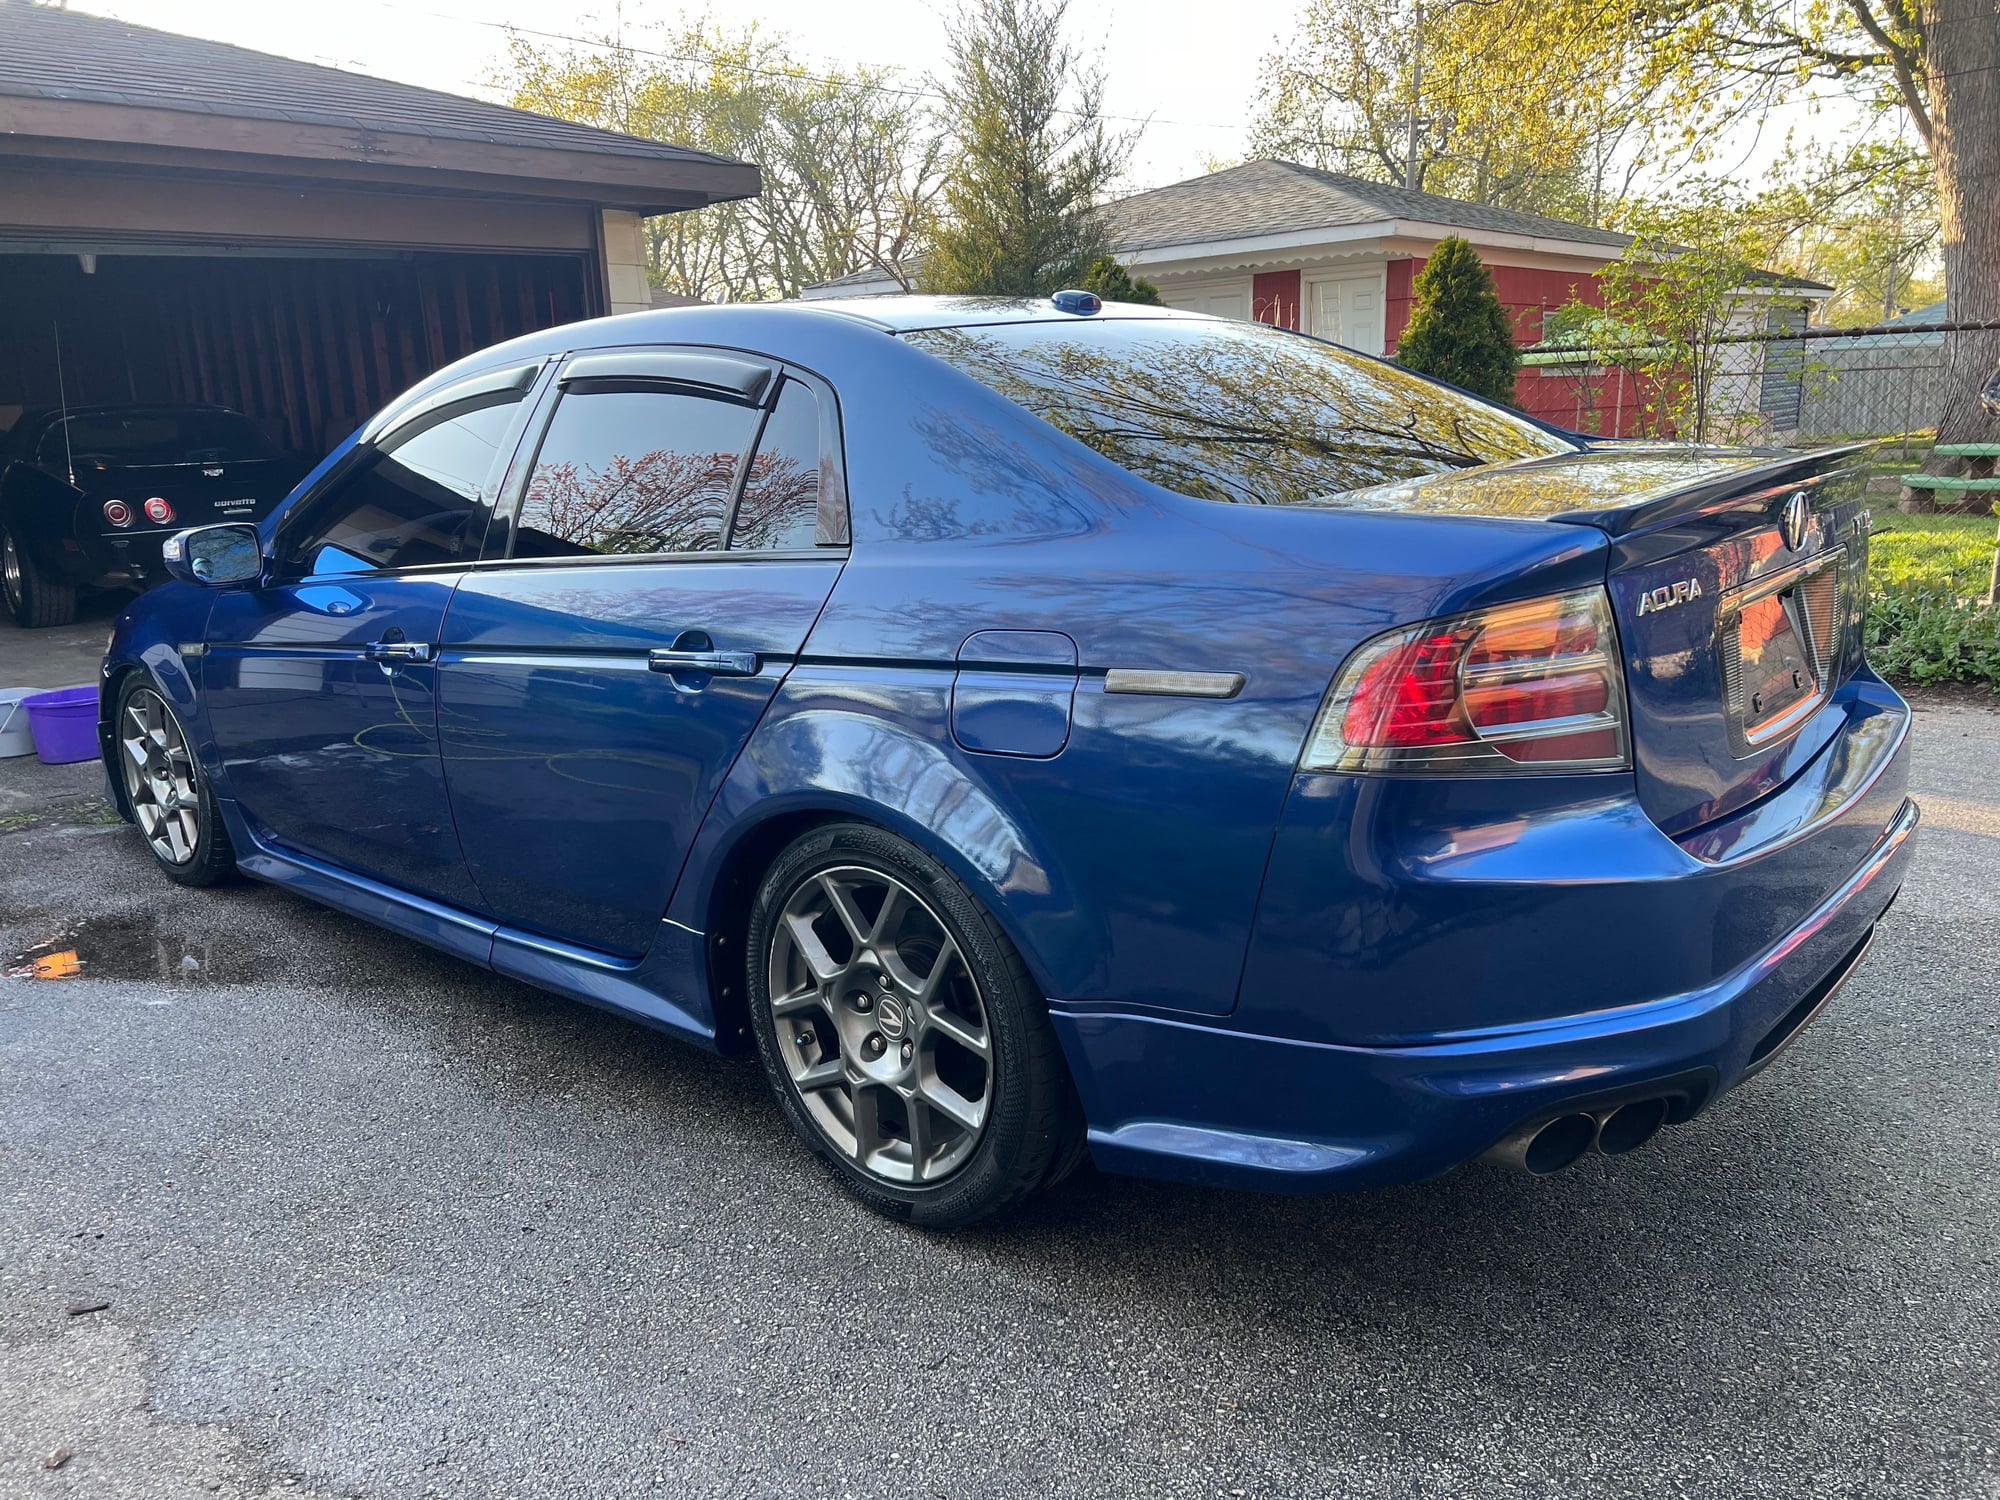 2007 Acura TL - FS: KBP j37 TL Type S - Used - VIN 19UUA76537A000171 - 146,000 Miles - 6 cyl - 2WD - Automatic - Sedan - Blue - Chicago, IL 60617, United States